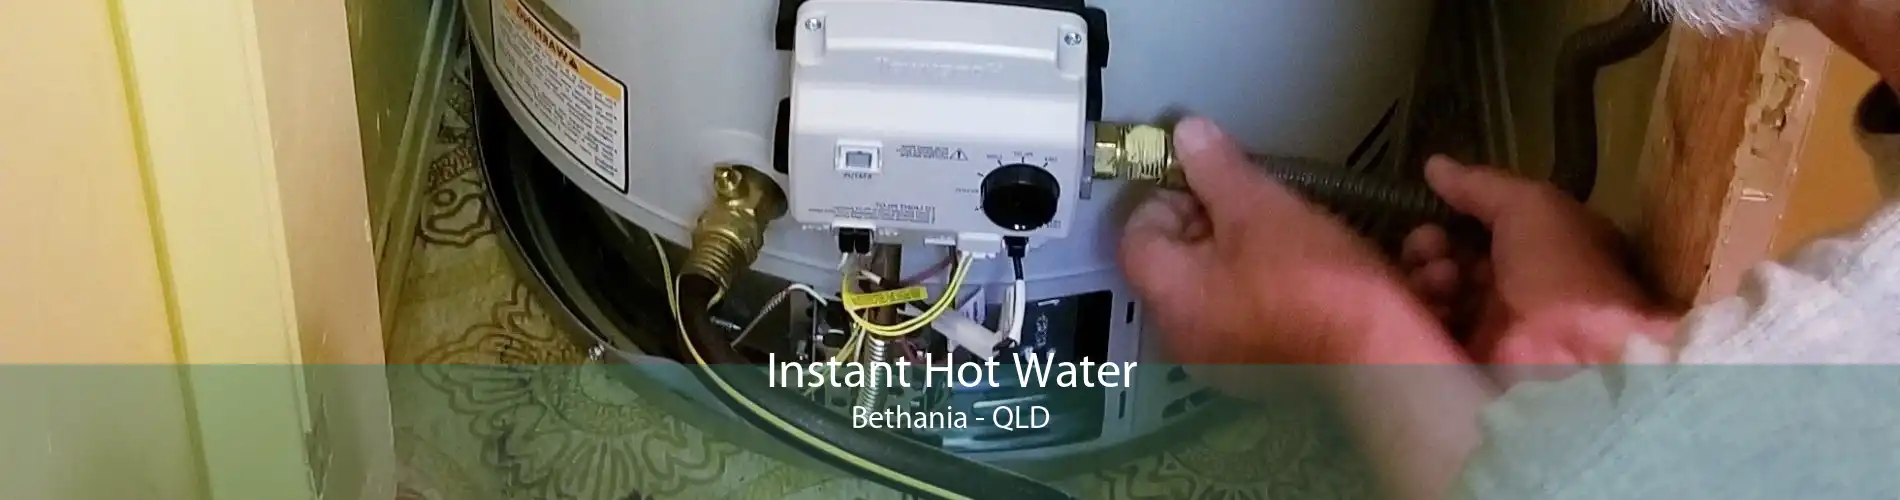 Instant Hot Water Bethania - QLD